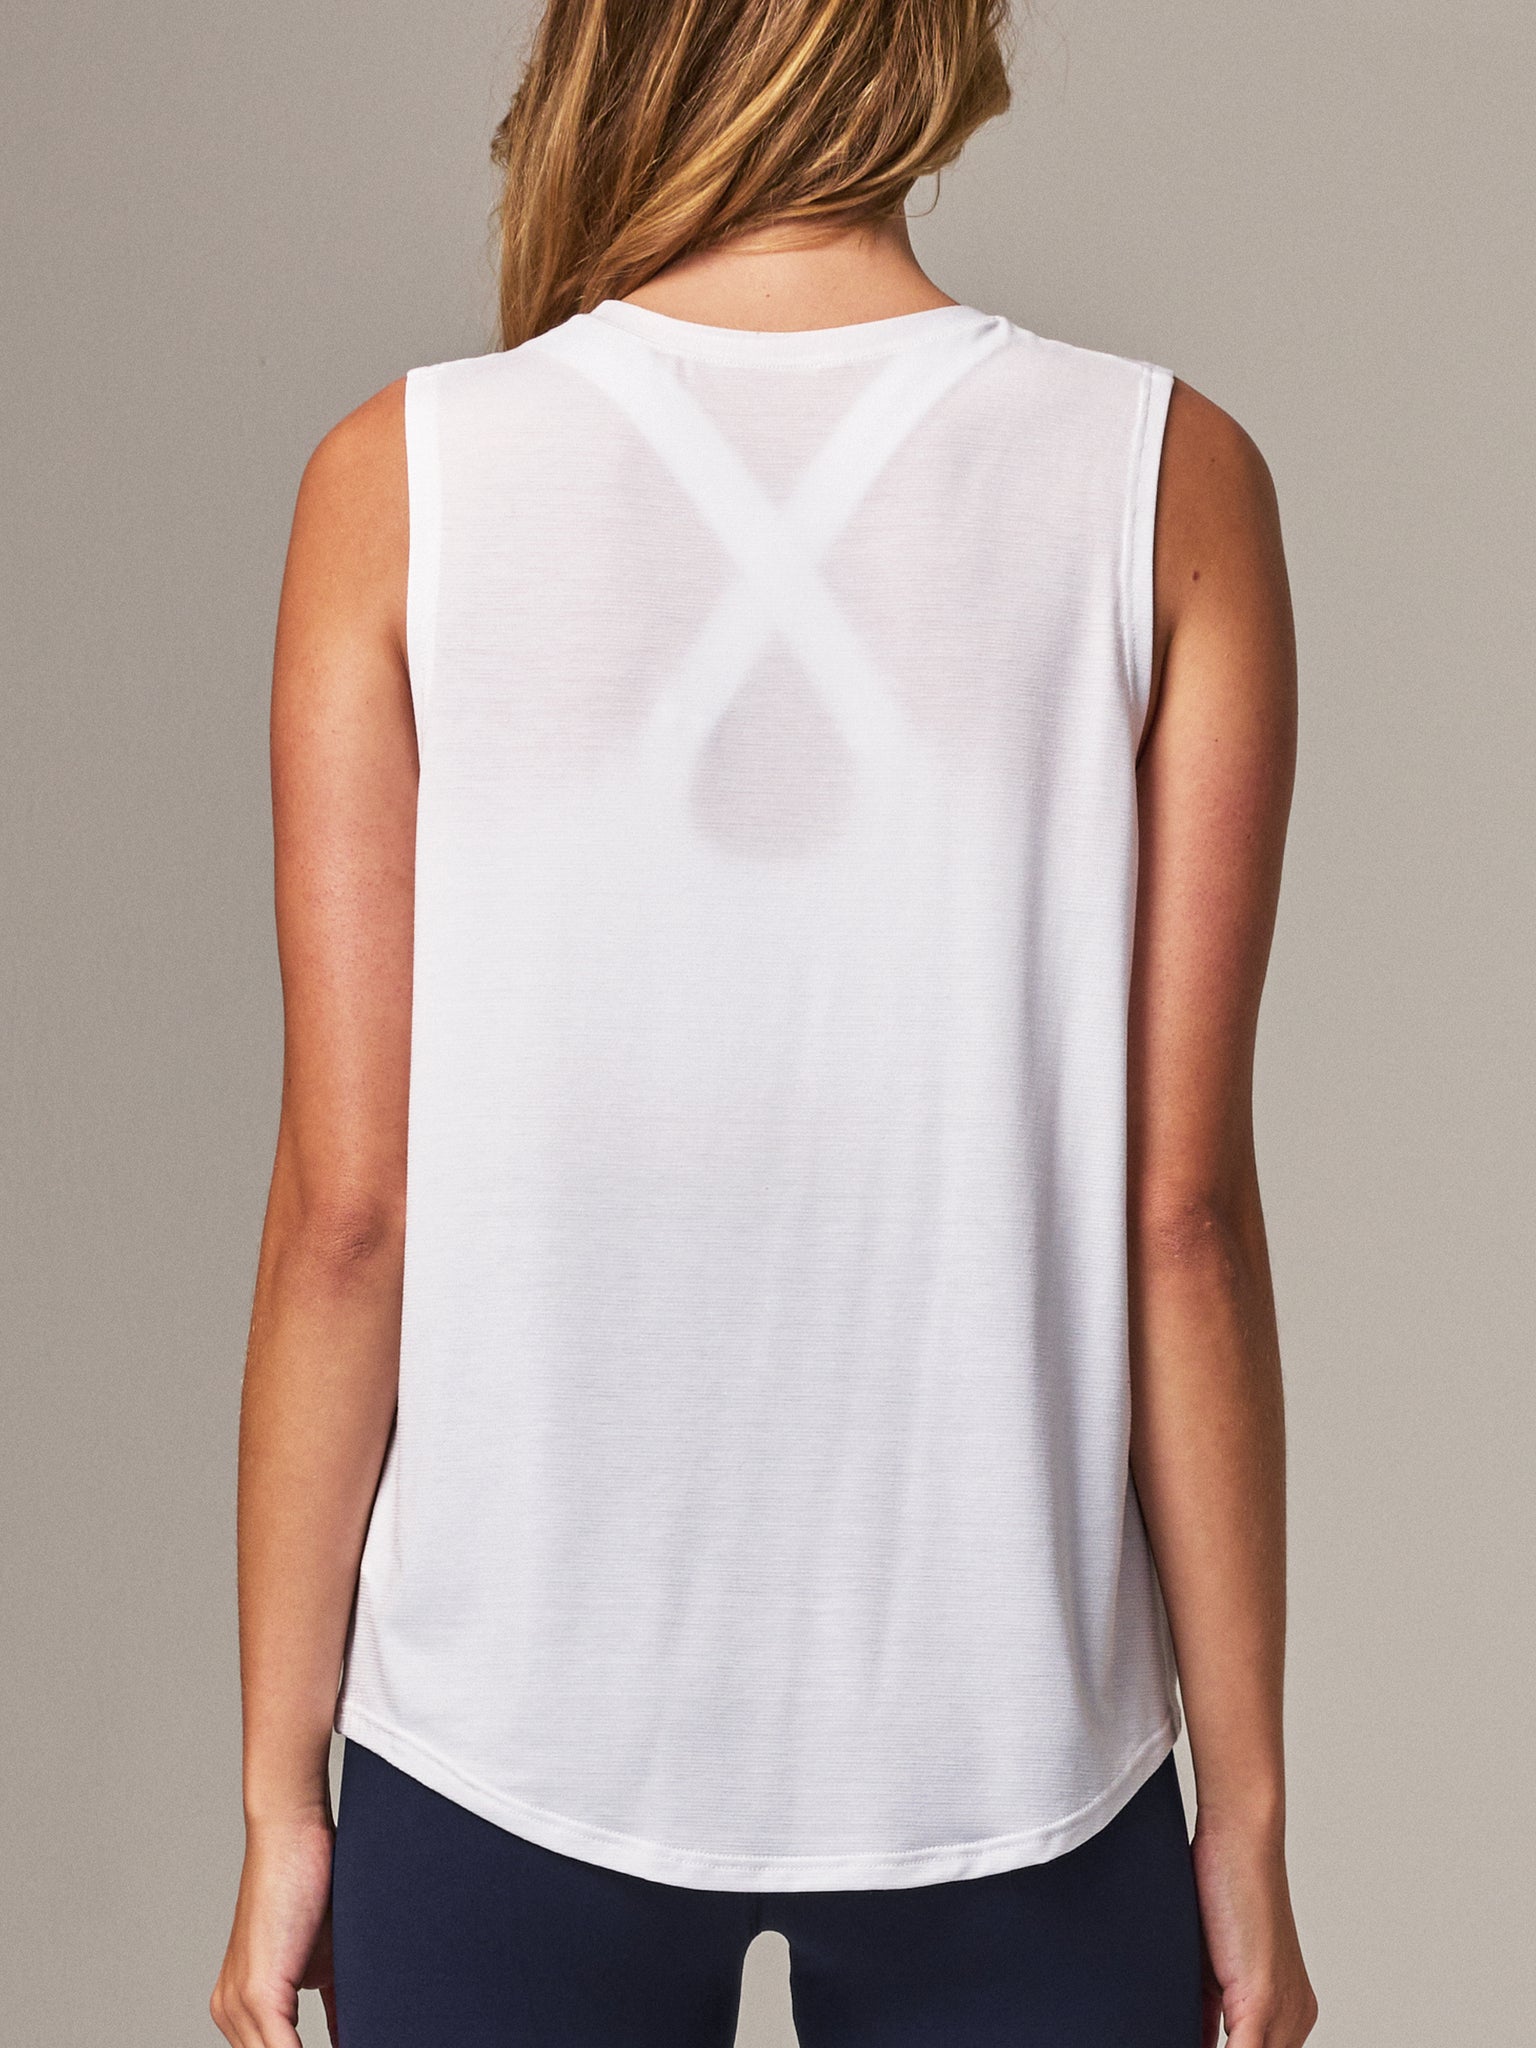 Dial Up Workout Tank - White - Tops